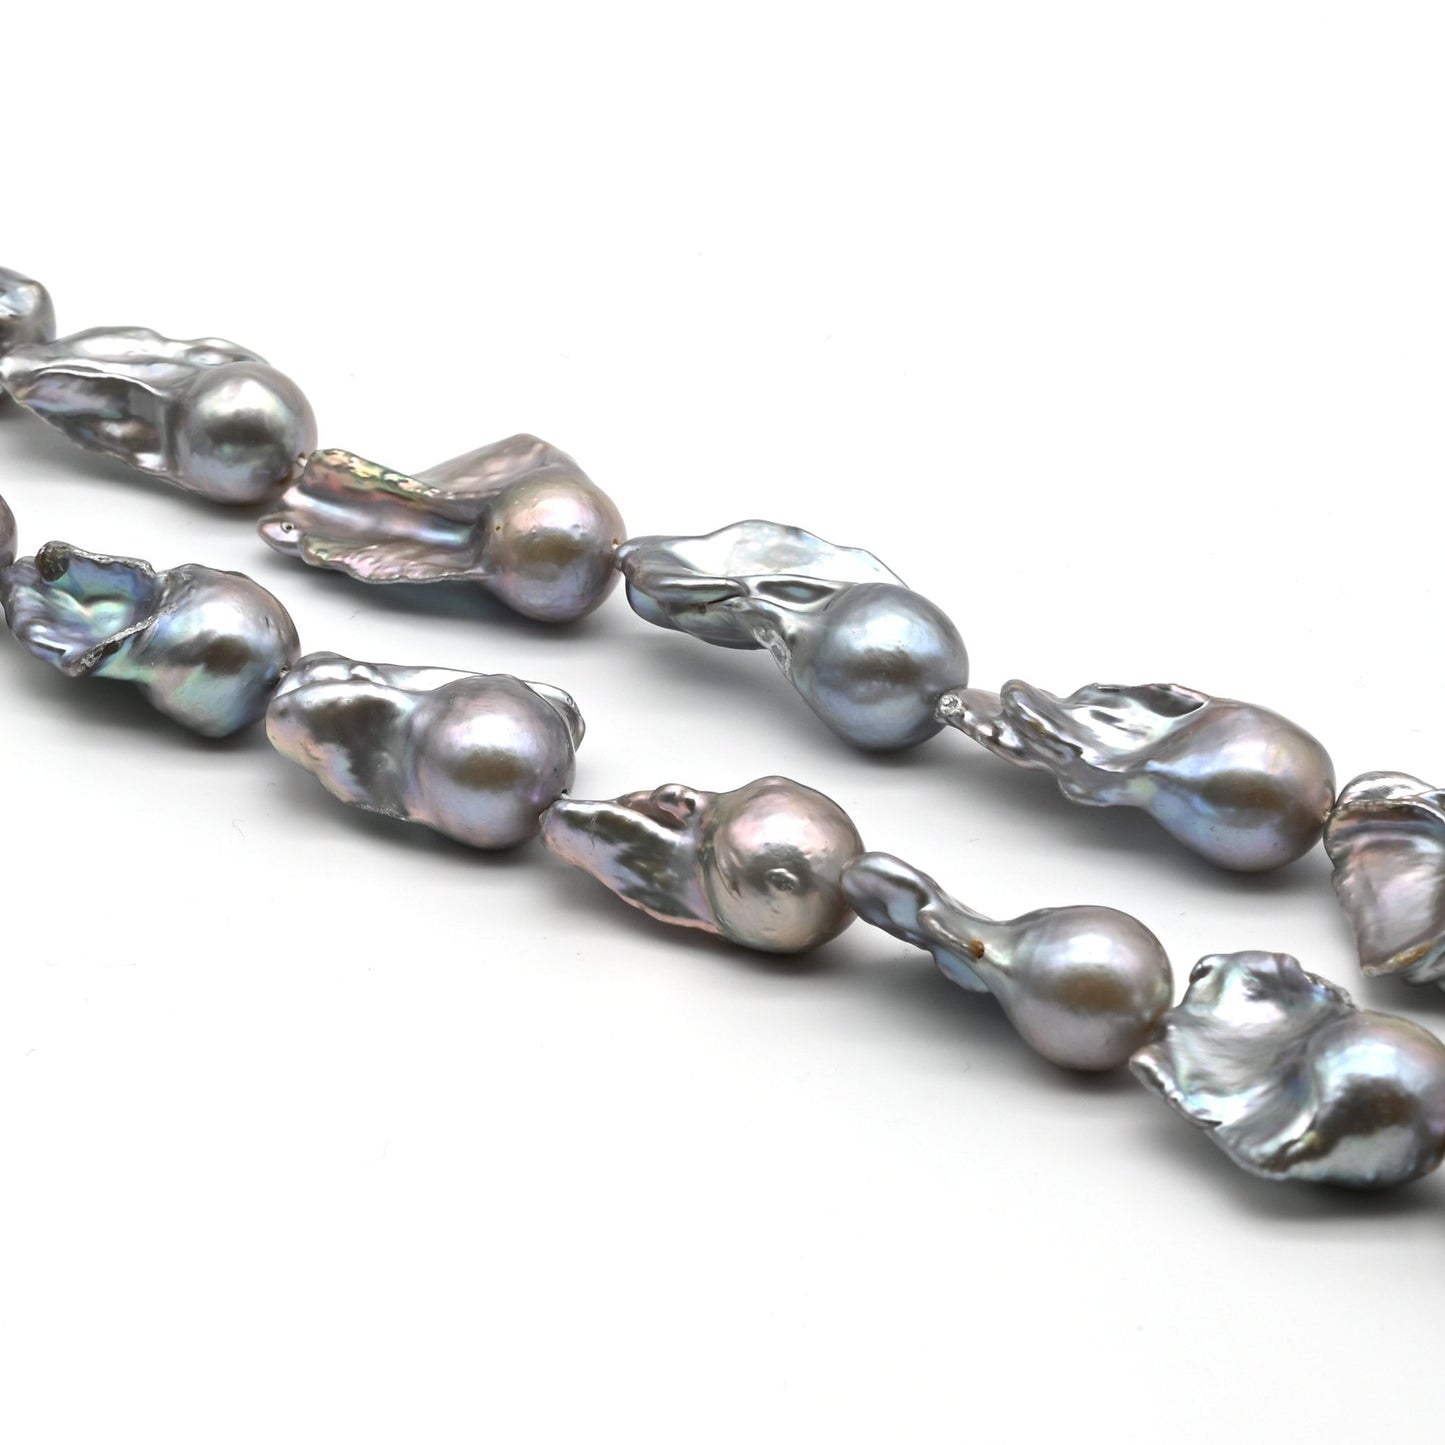 Large Grey Baroque Pearls, Freshwater Cultured Pearl Flameball Fireball in Silver Color, 13-18mm, 1 PCS or Full Strand, SKU# BAR021